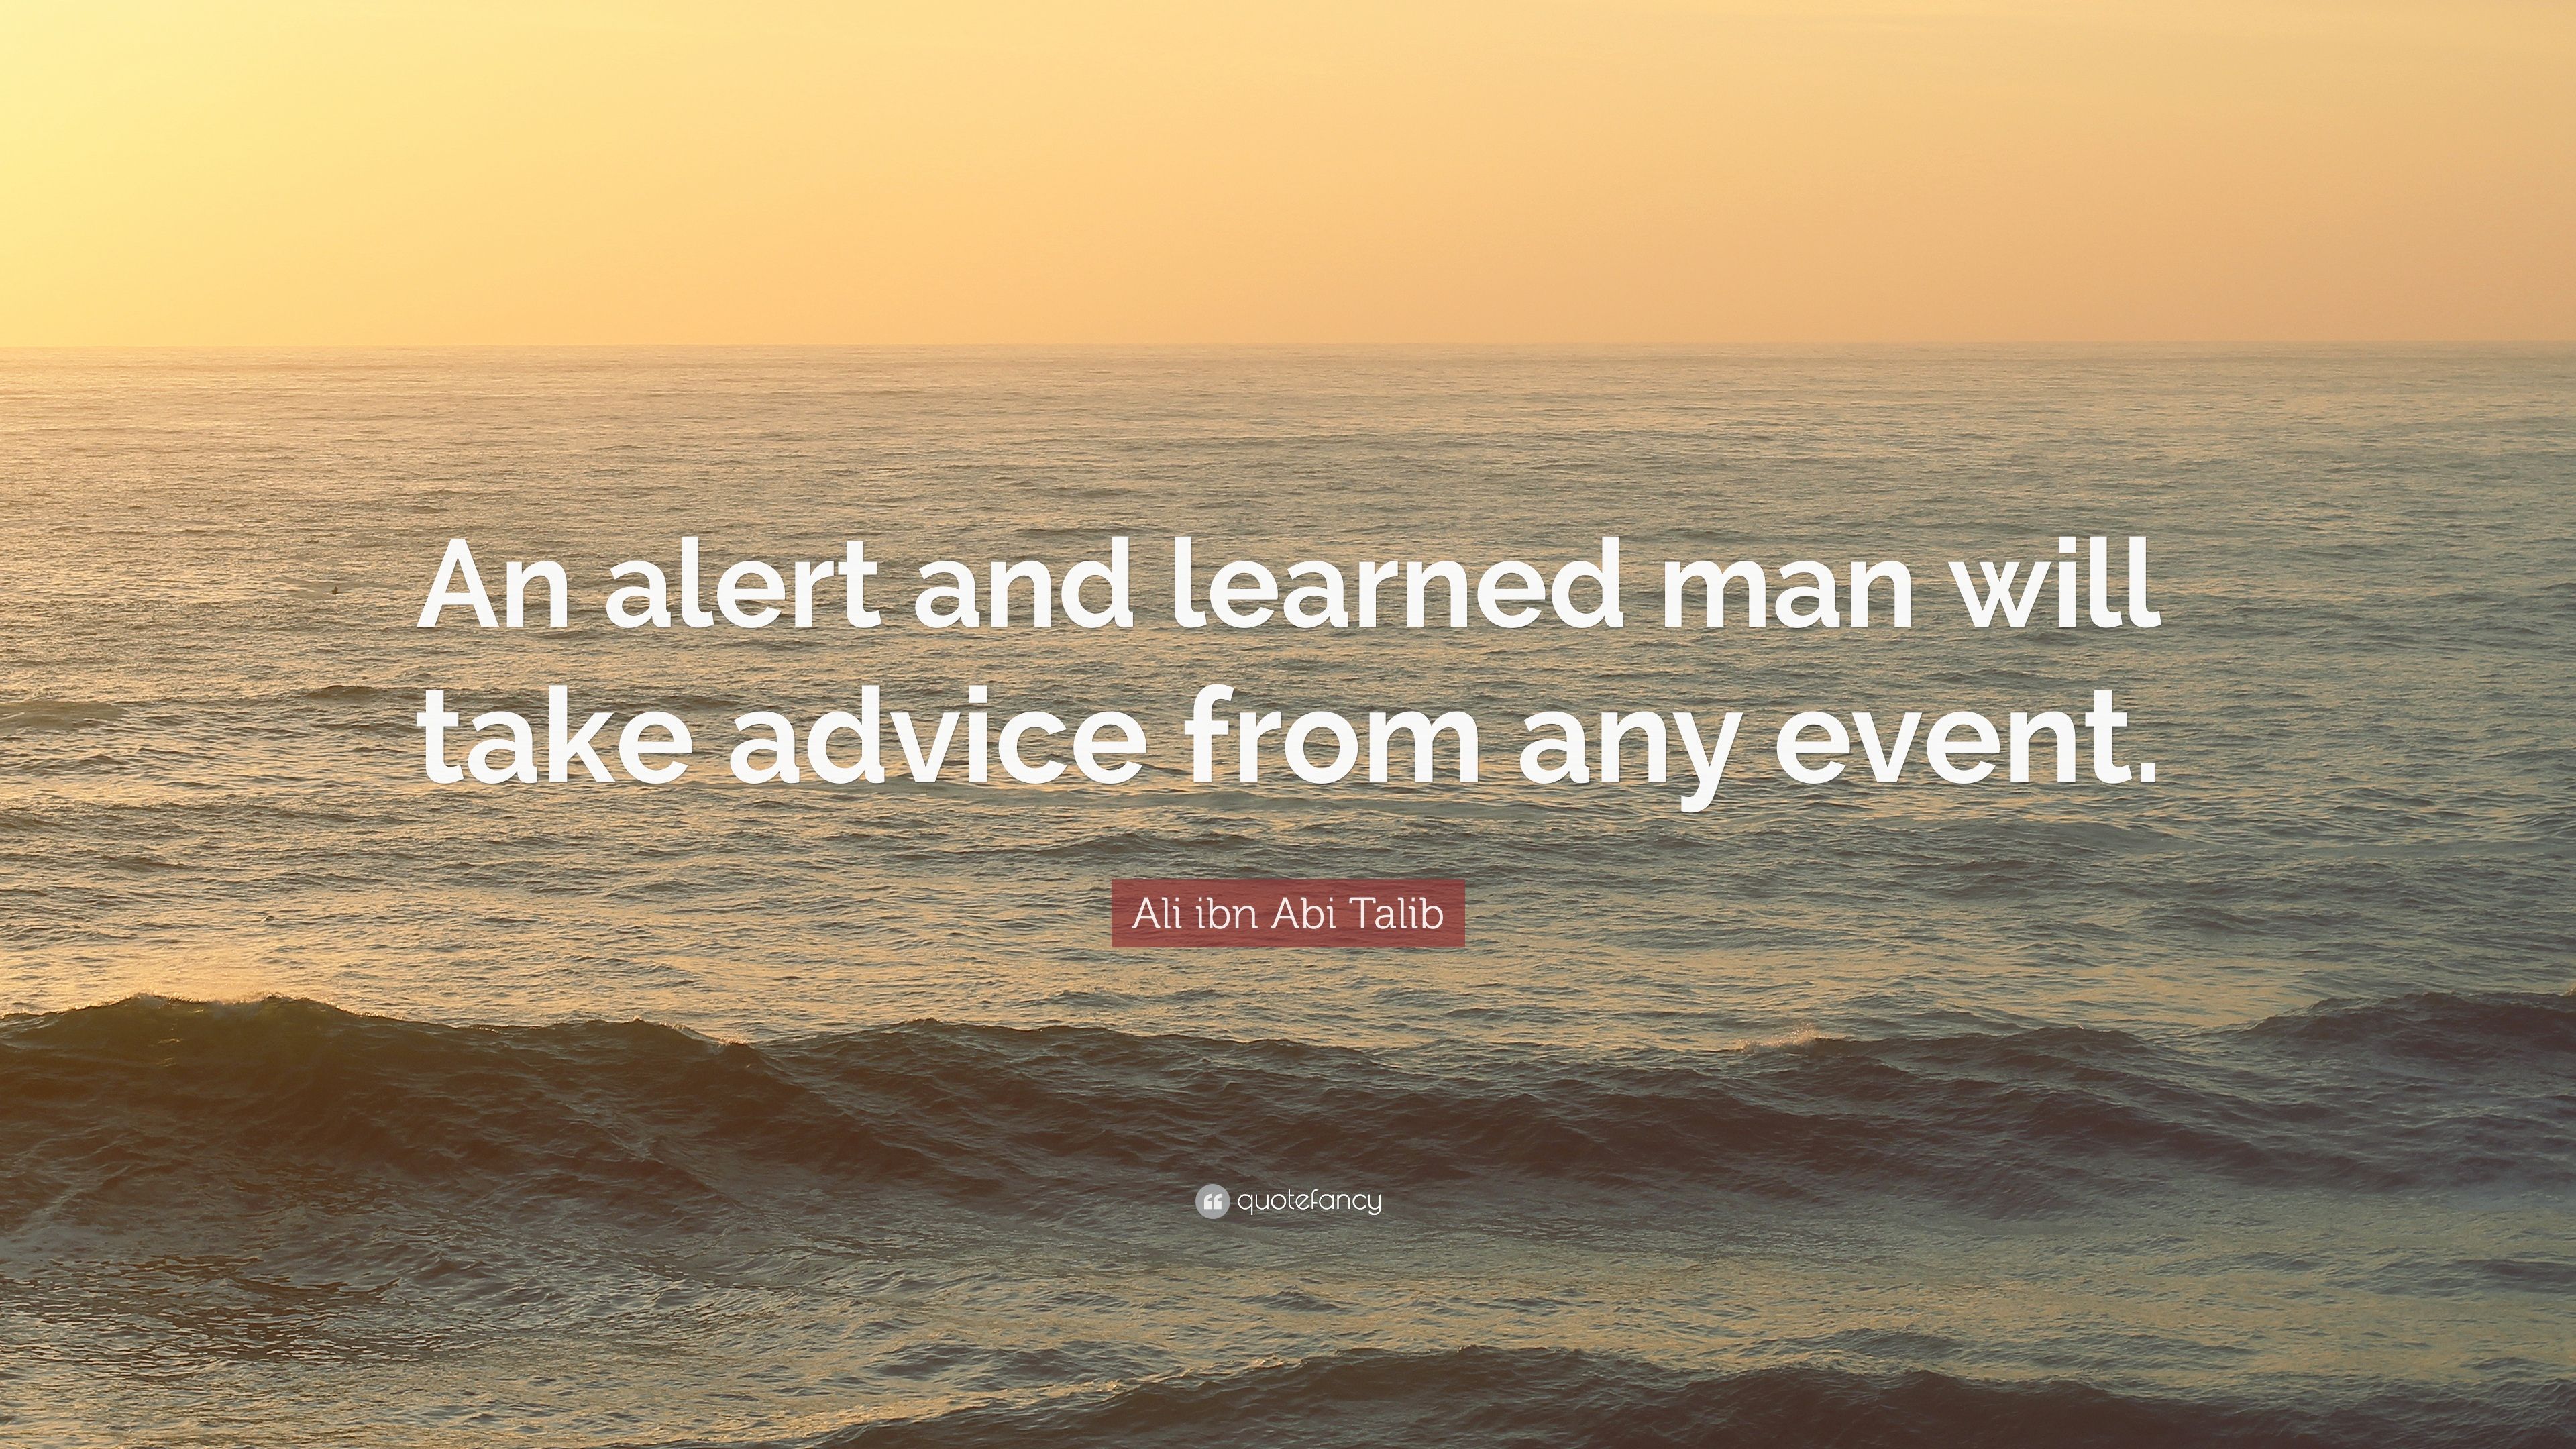 Ali ibn Abi Talib Quote: “An alert and learned man will take